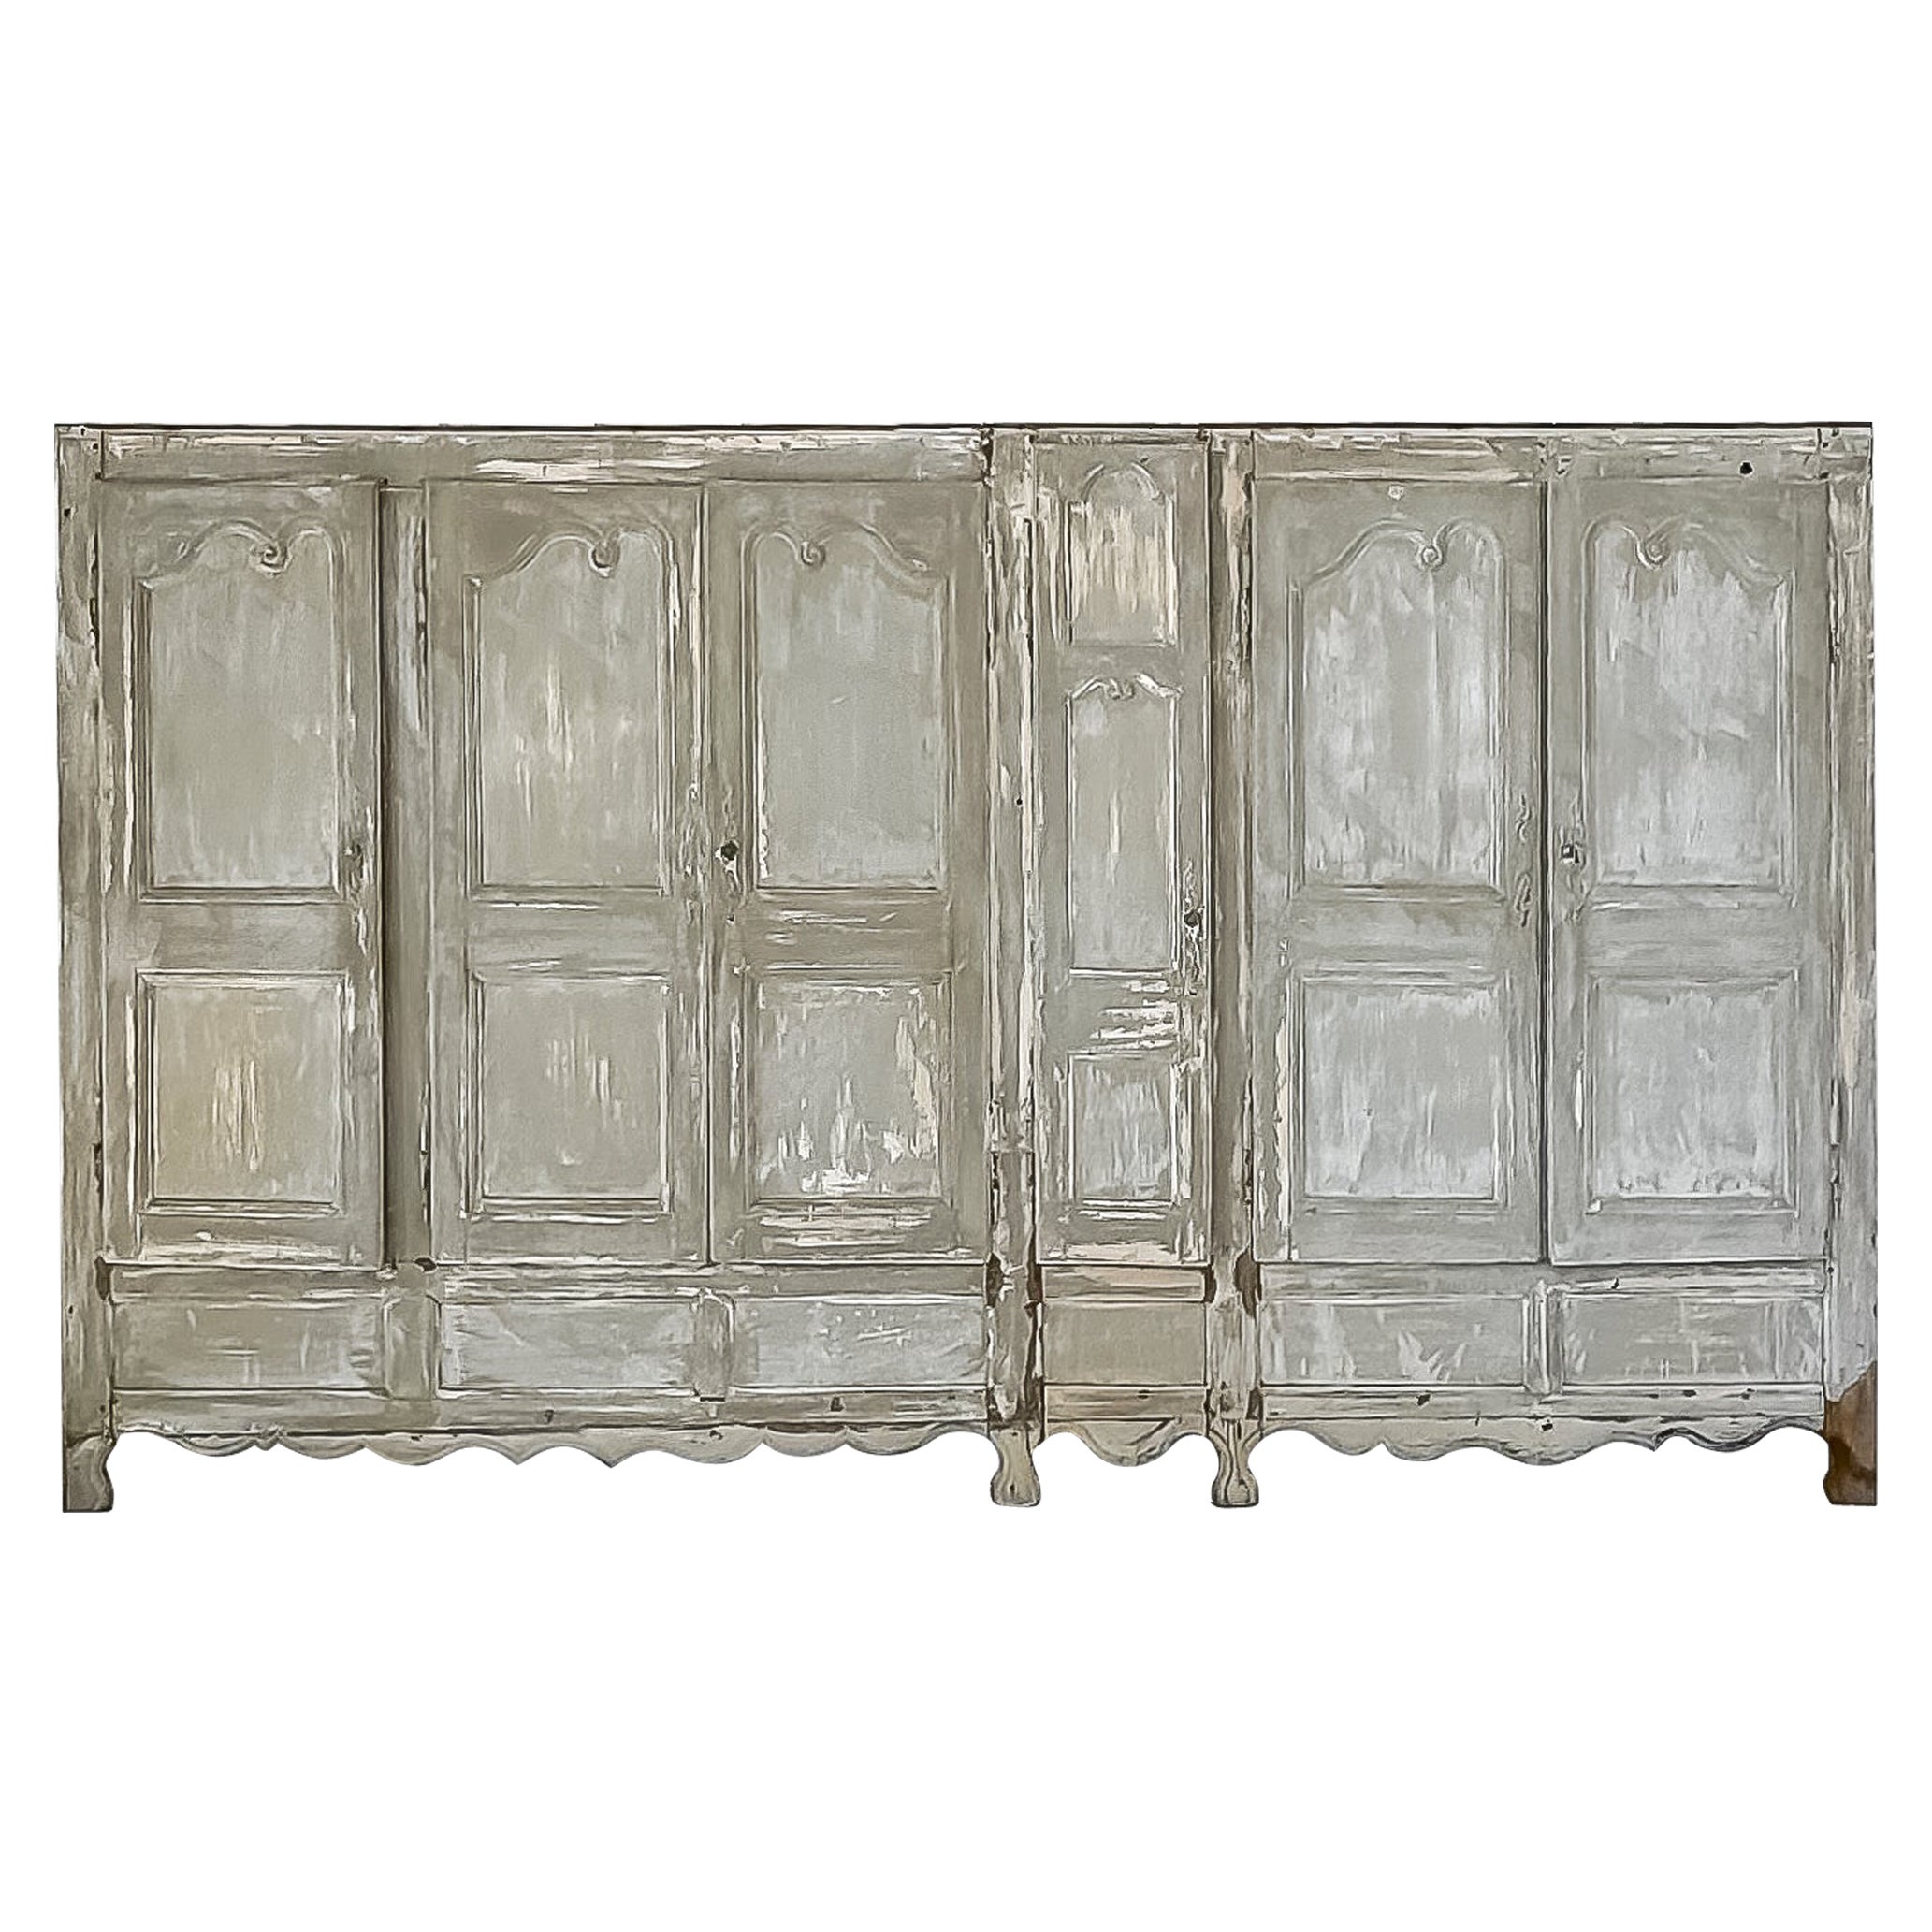 19th Century Built-In French Provincial Wardrobe Wall with Doors